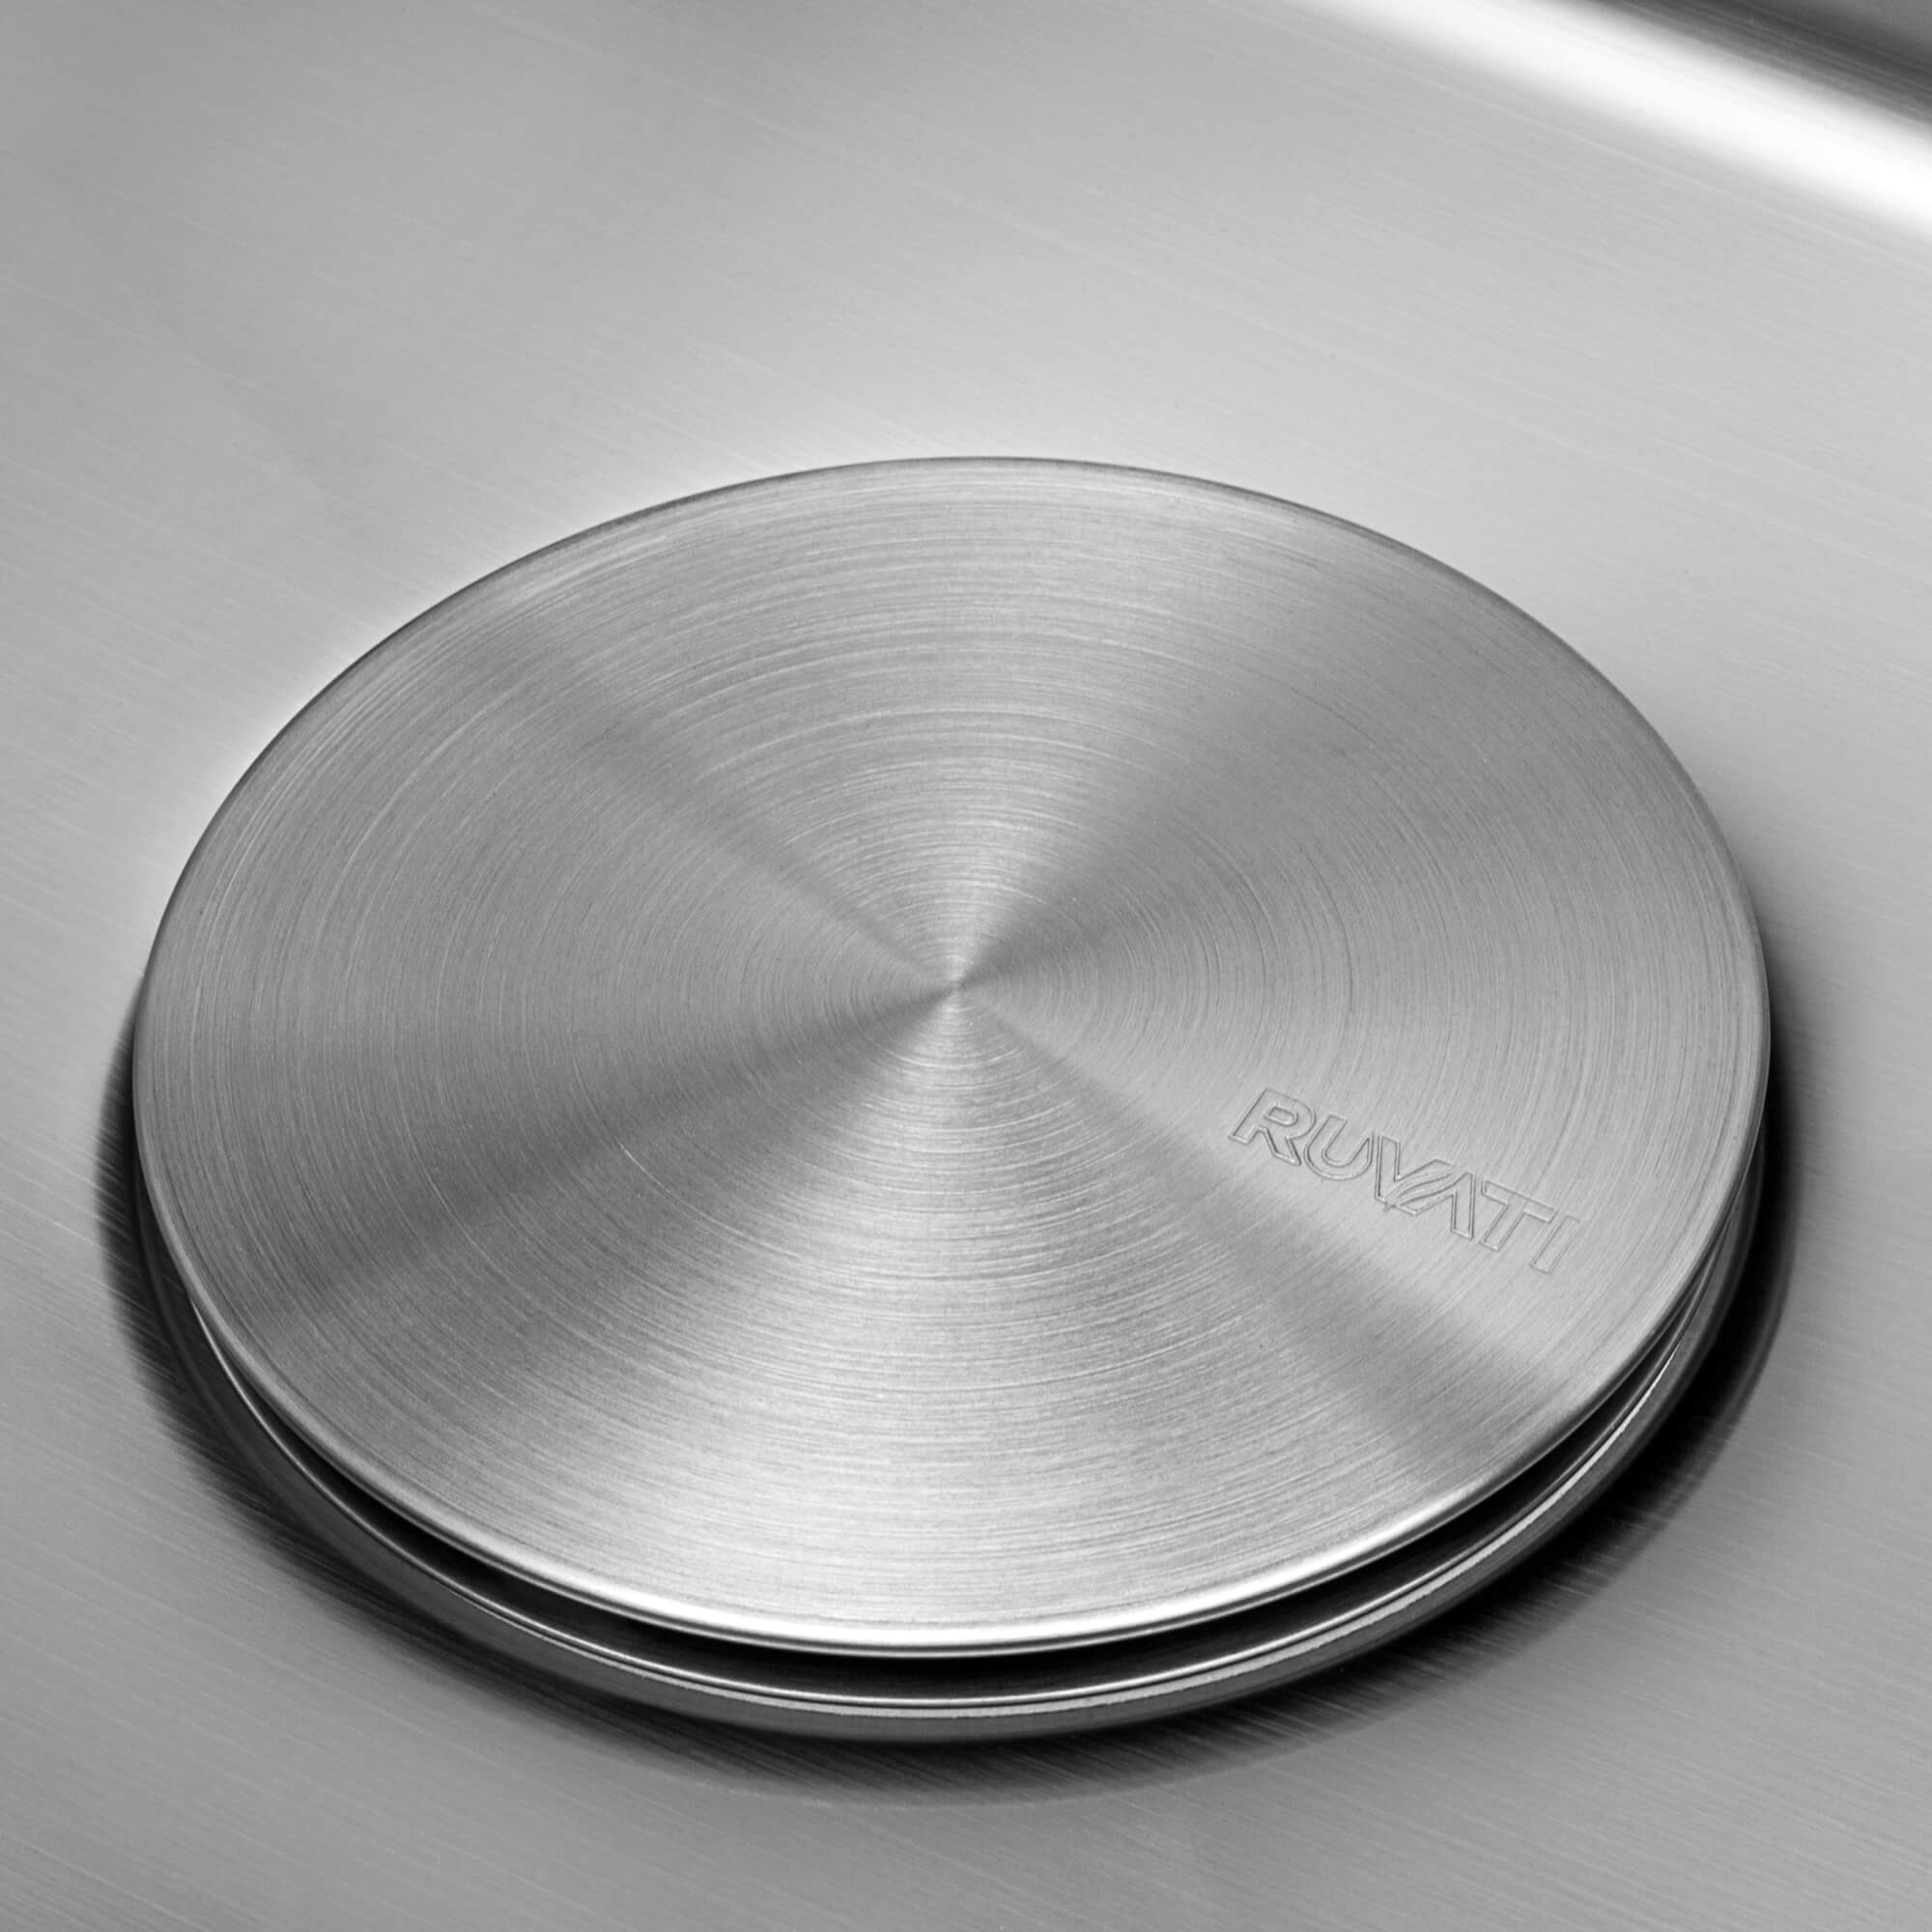 Ruvati Drain Cover for Kitchen Sink and Garbage Disposal - Brushed  Stainless Steel - RVA1035 - Ruvati USA